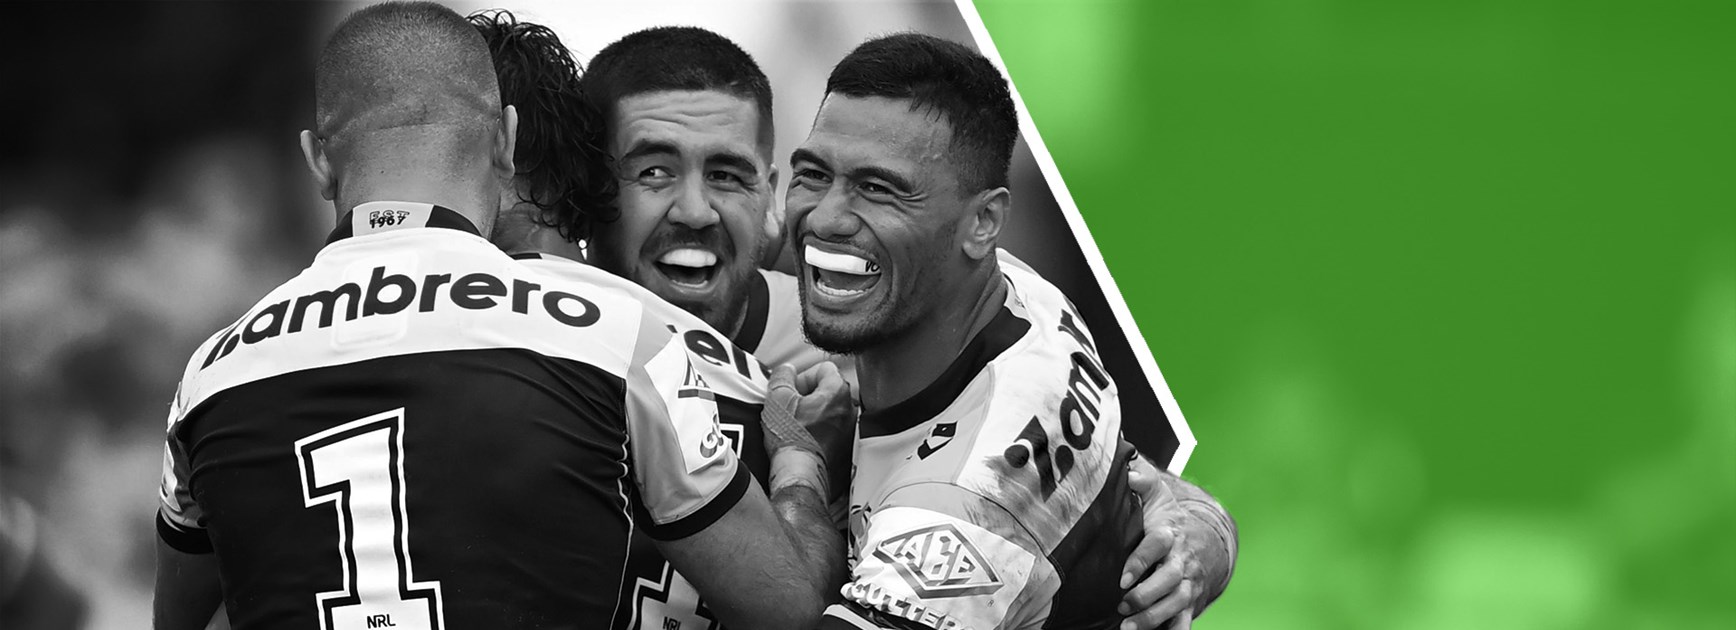 NRL Tipping: Expert tips for Round 7